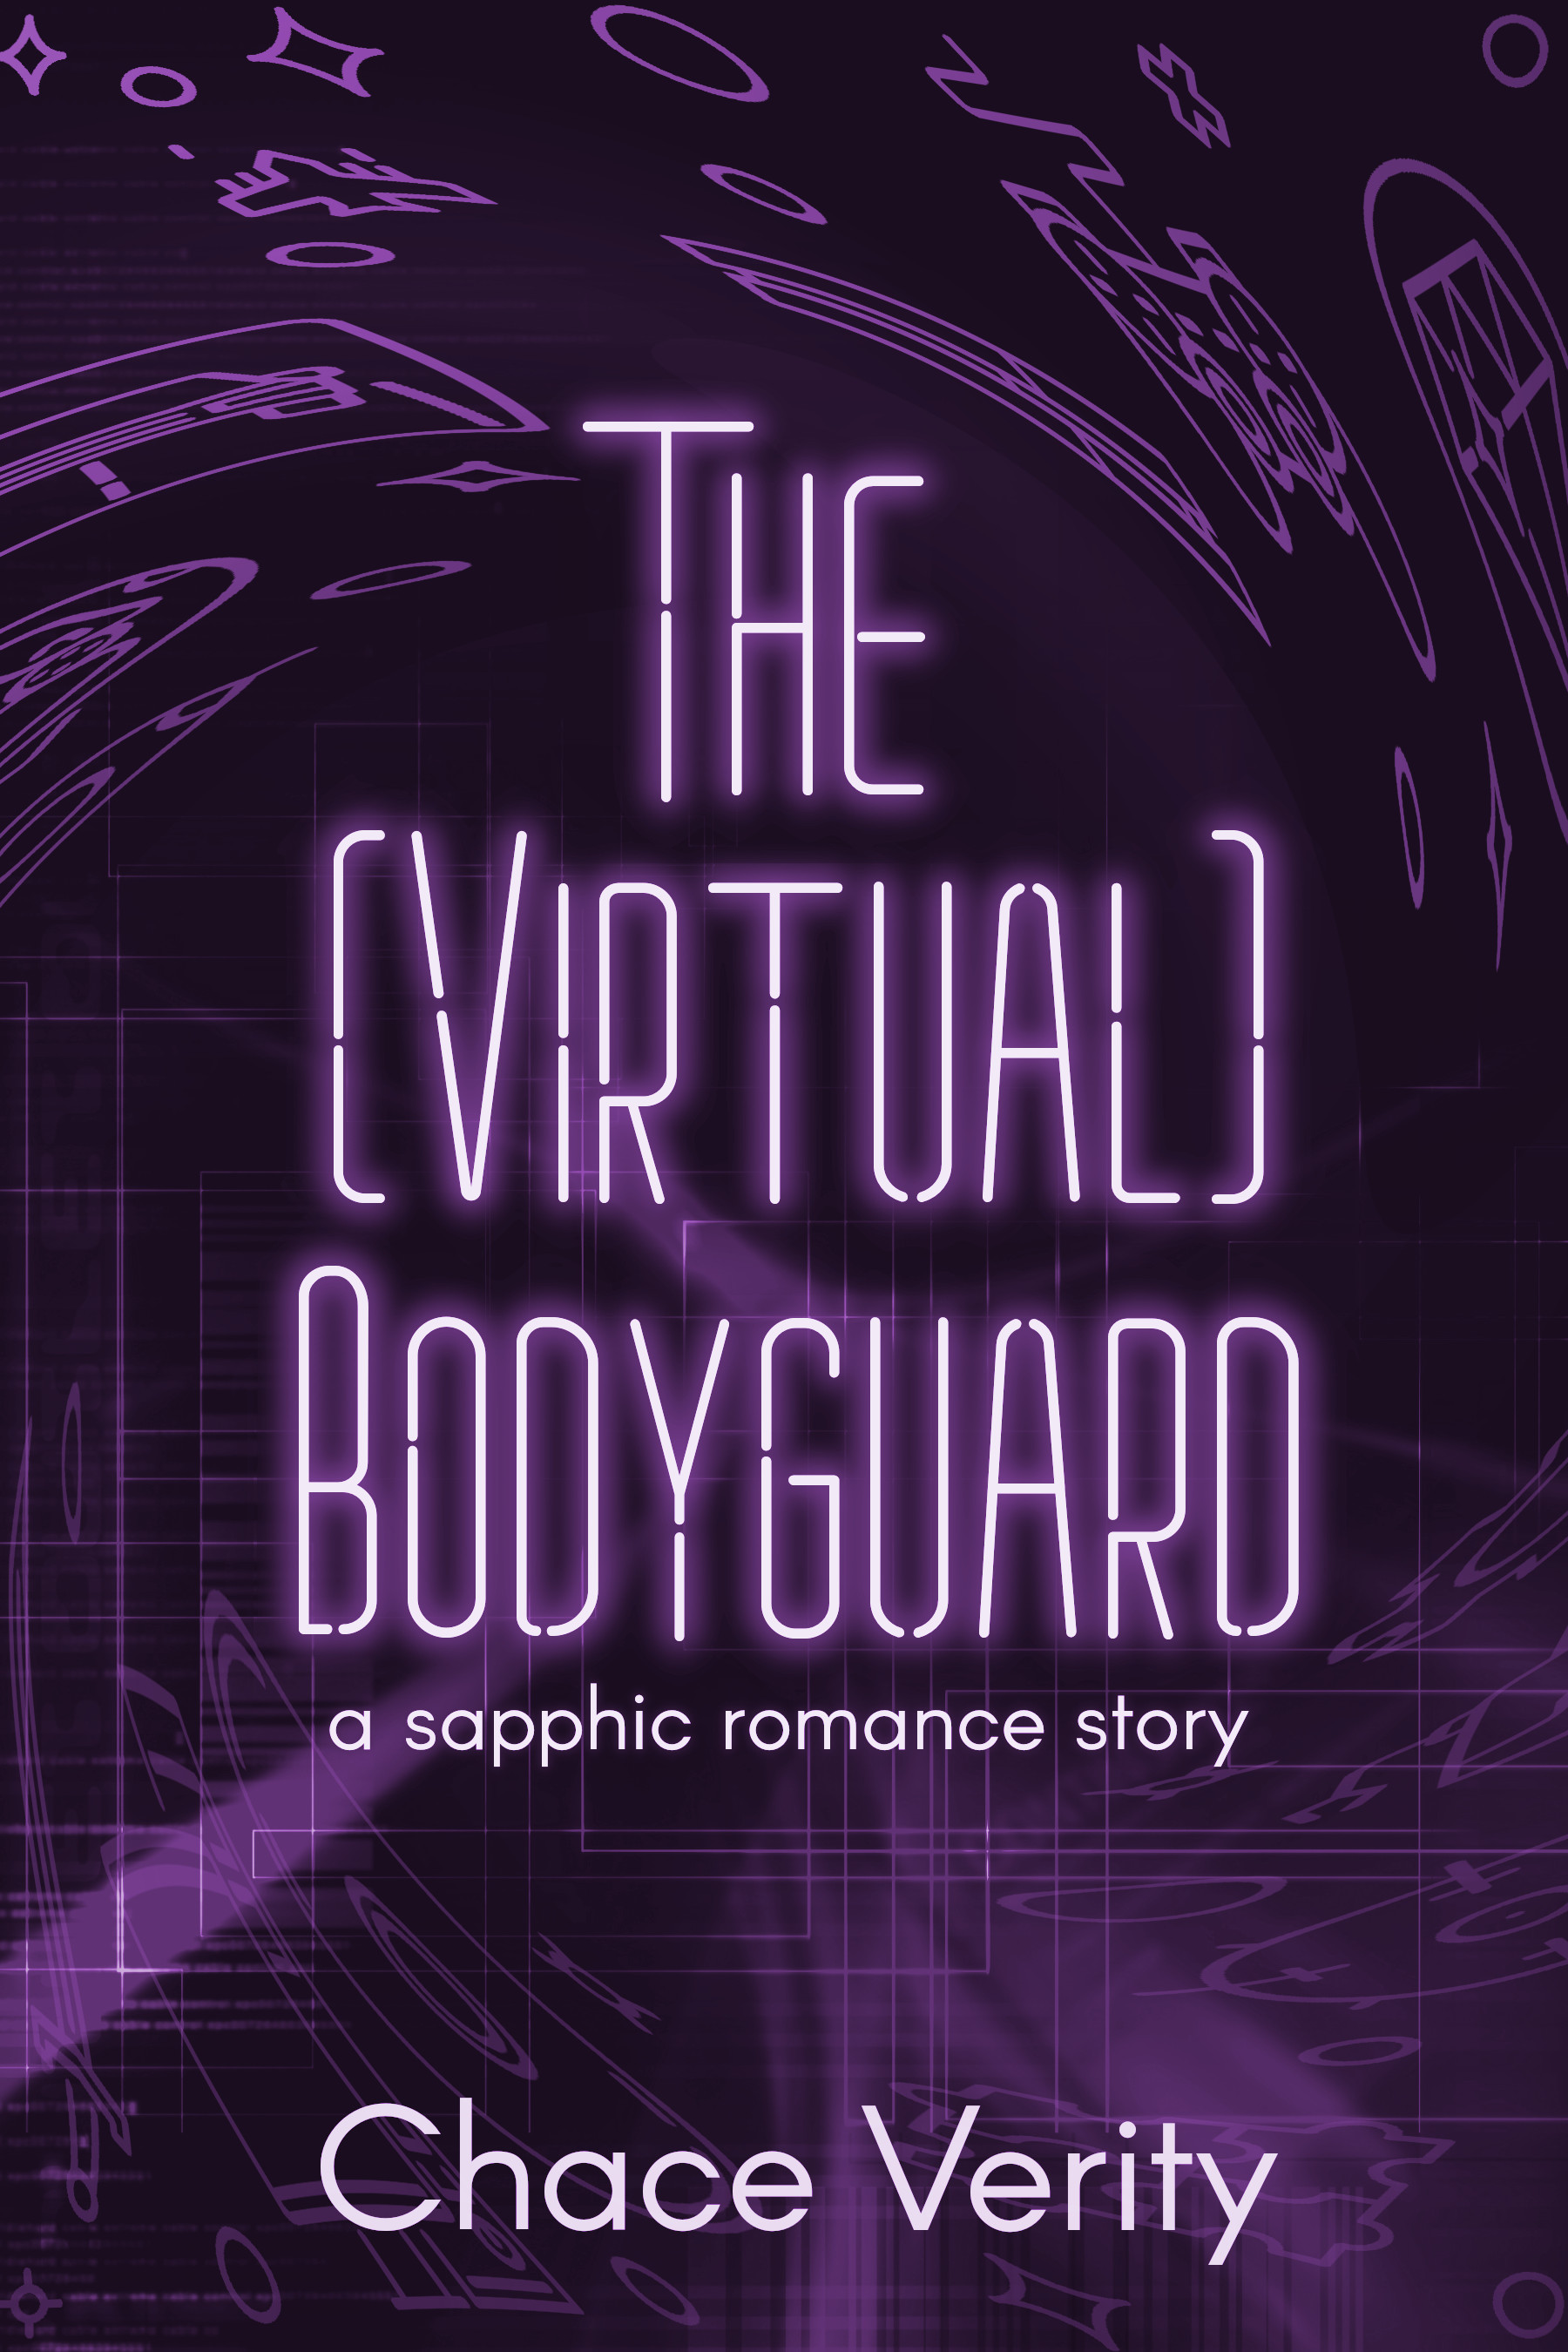 cover for Chace Verity's The Virtual Bodyguard featuring the title against a purple, tech-y background.